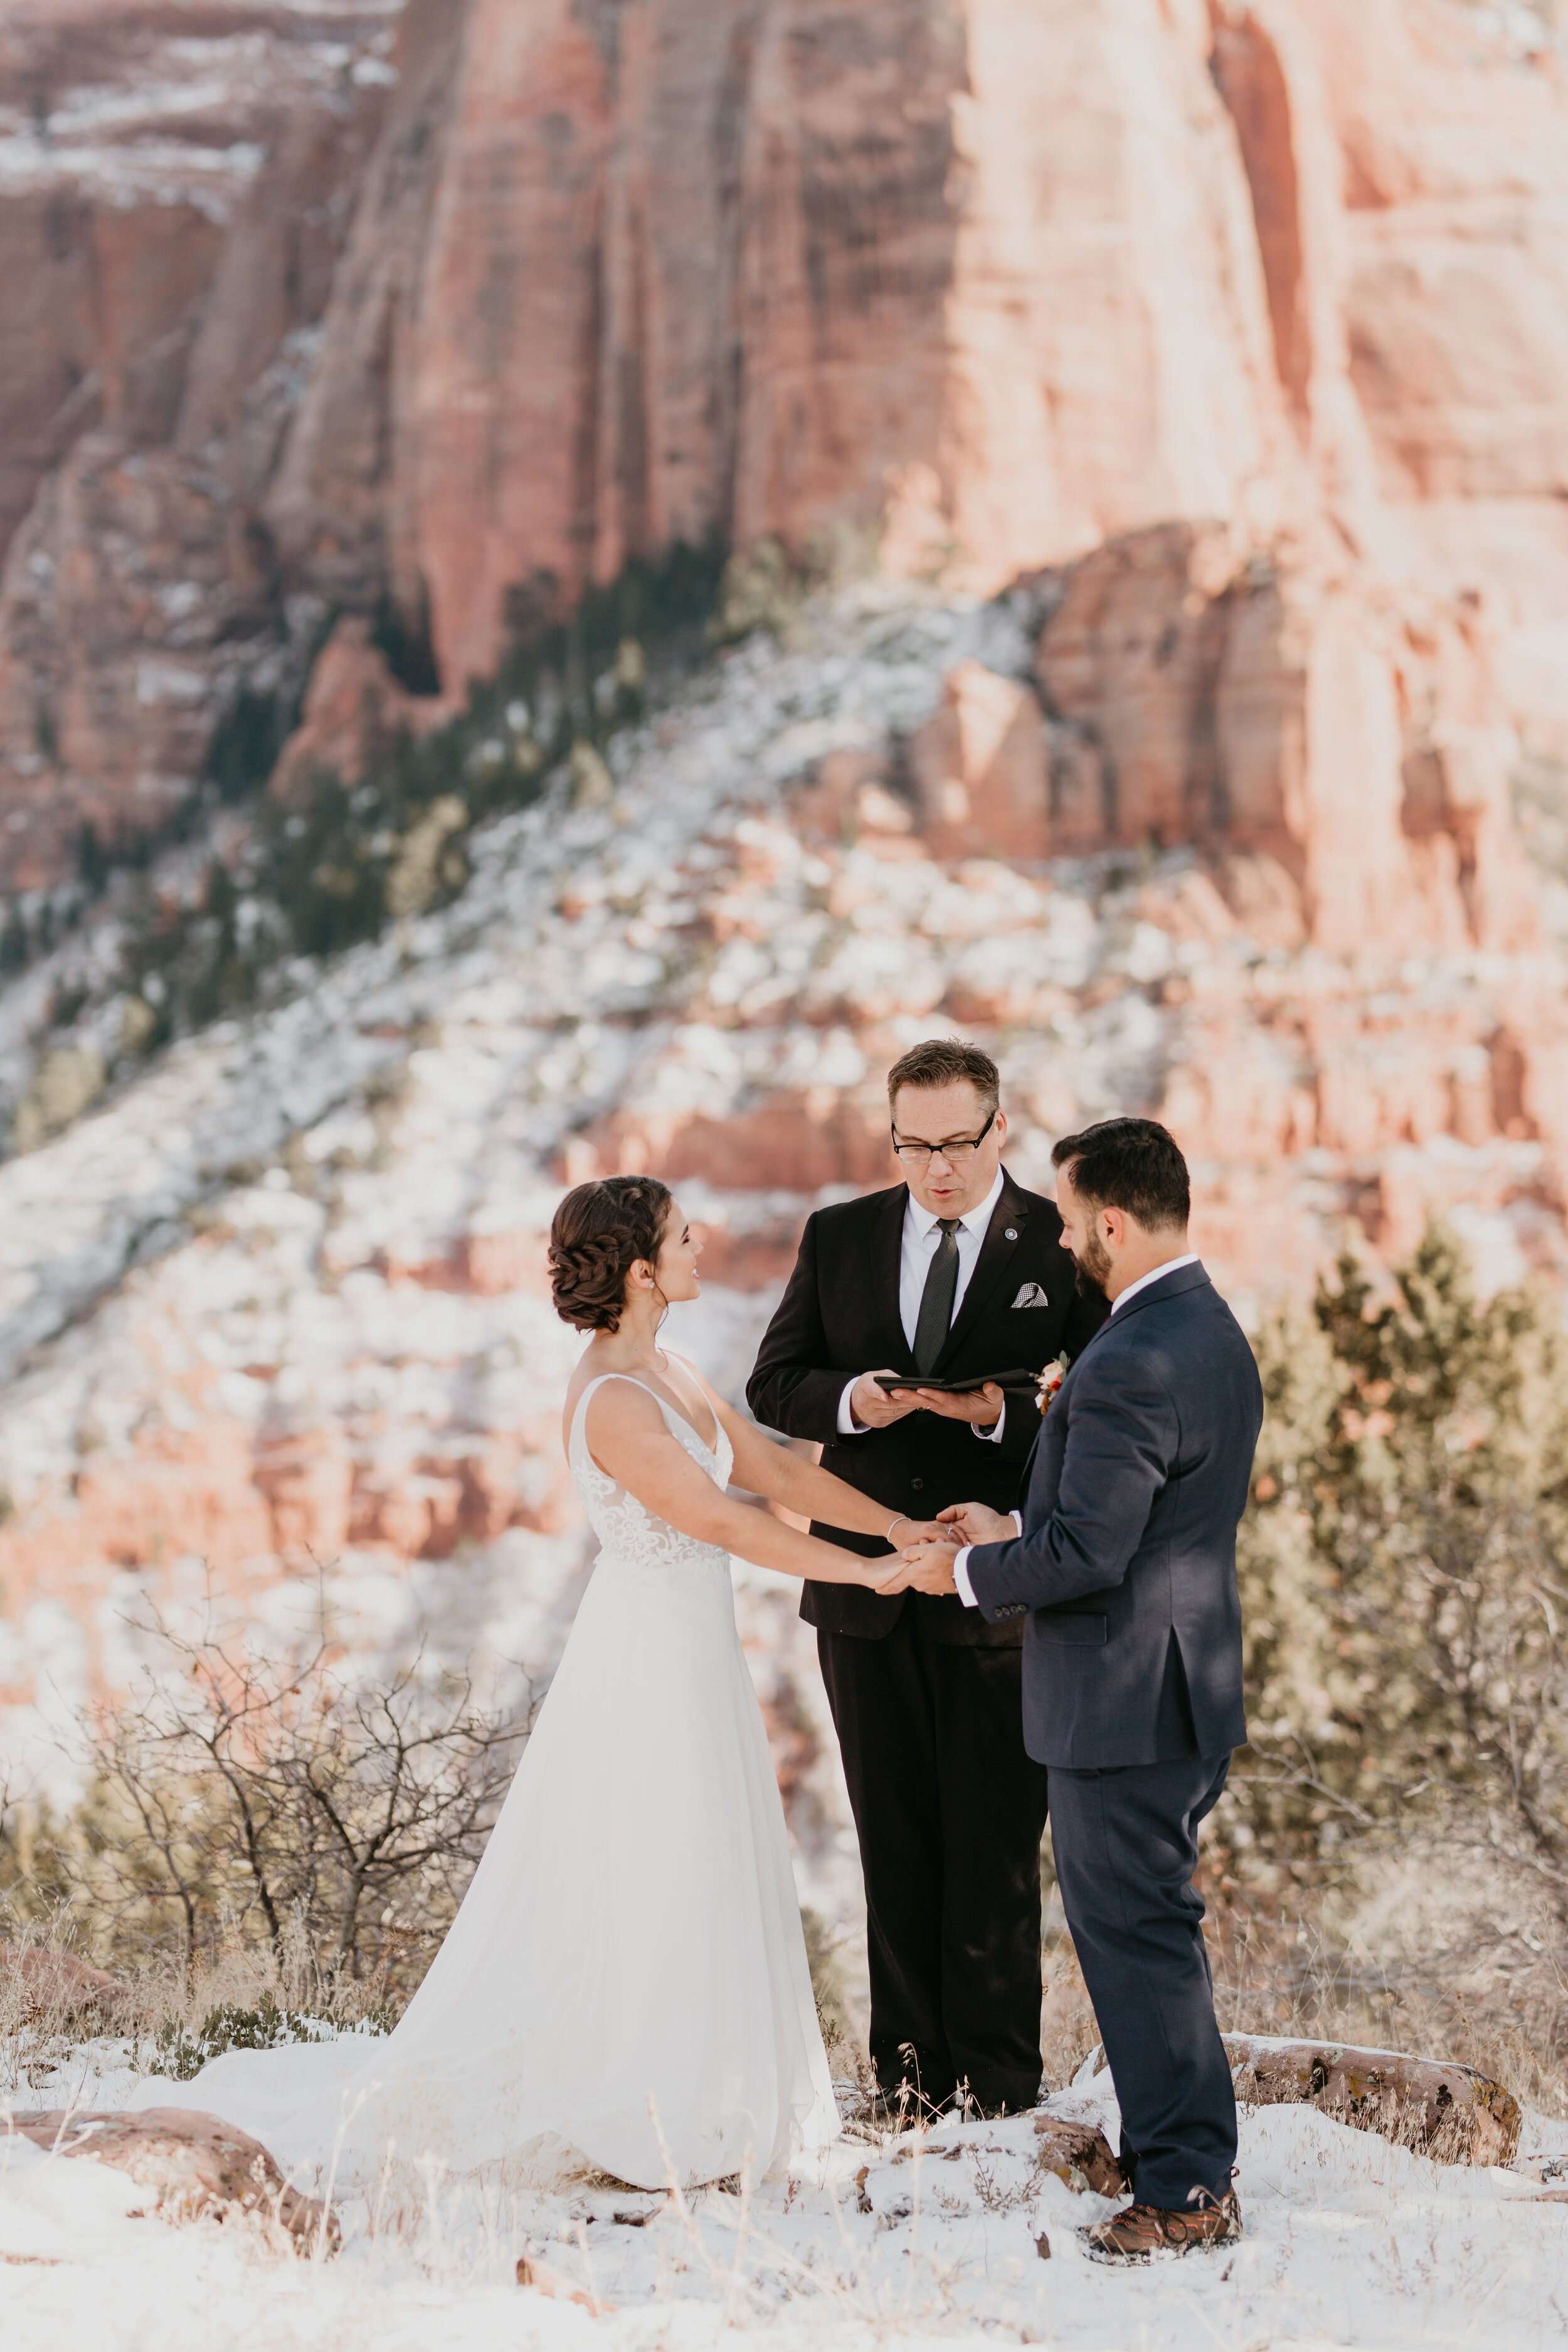 Nicole-Daacke-Photography-snowy-hiking-elopement-in-zion-national-park-zion-elopement-photographer-canyon-overlook-trial-brial-portraits-in-mt-zion-national-park-utah-desert-adventure-elopement-photographer-115.jpg